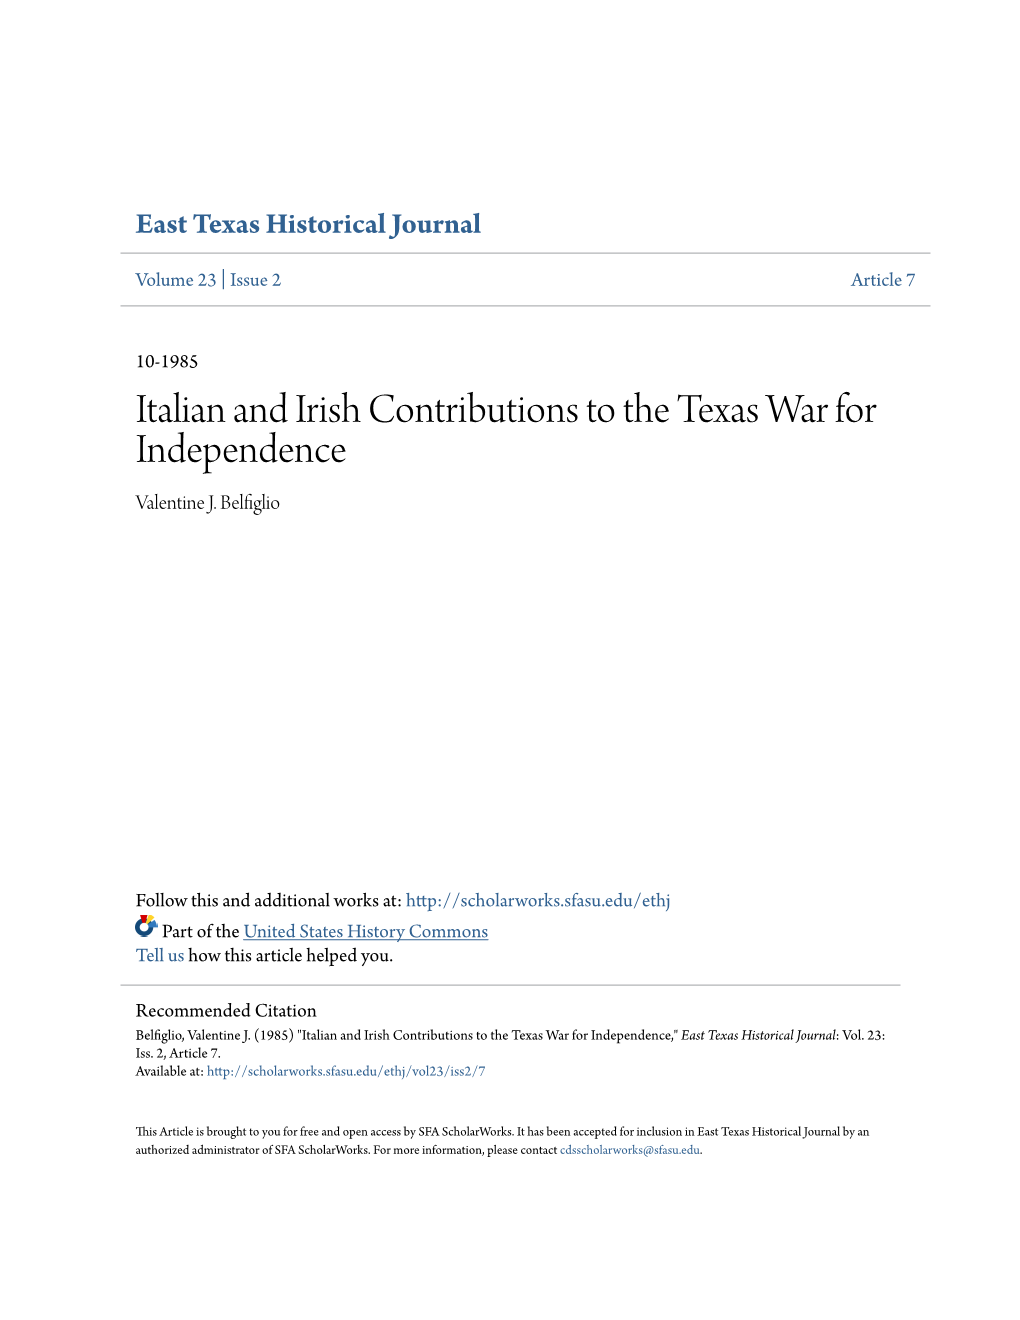 Italian and Irish Contributions to the Texas War for Independence Valentine J